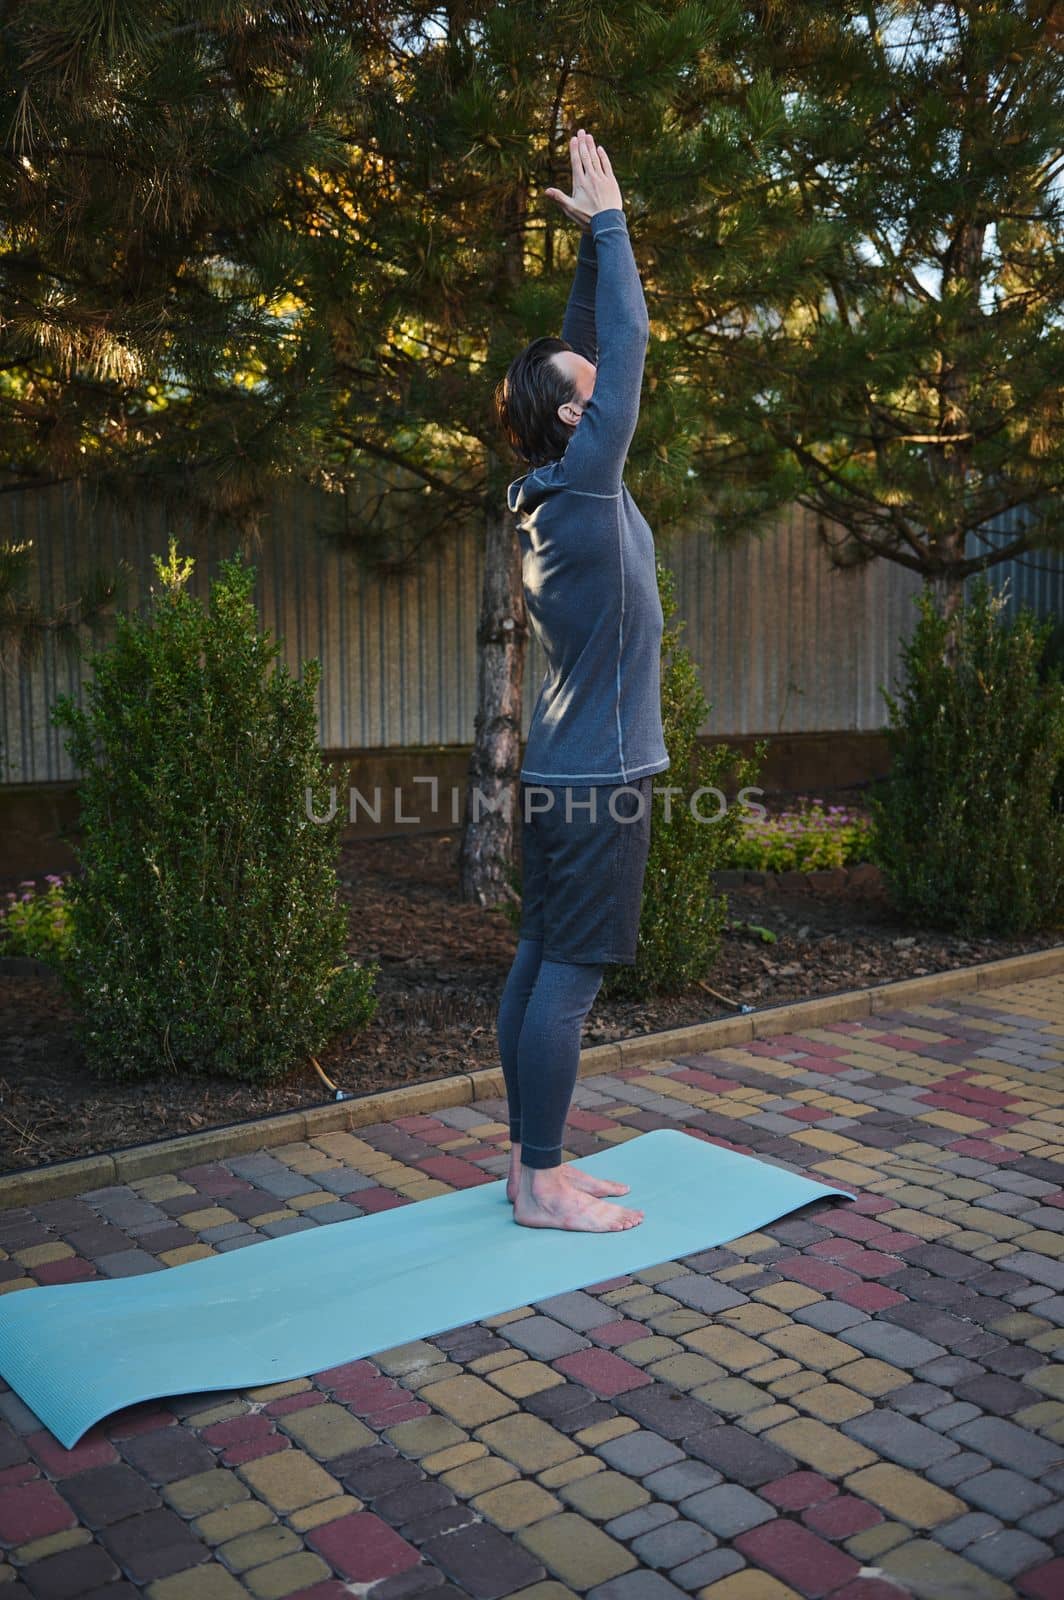 Full-length portrait of a sportsman doing outdoor sports, standing barefoot on a fitness mat, stretching his body, pulling his arms up during stretching and yoga practice. Active healthy lifestyle.